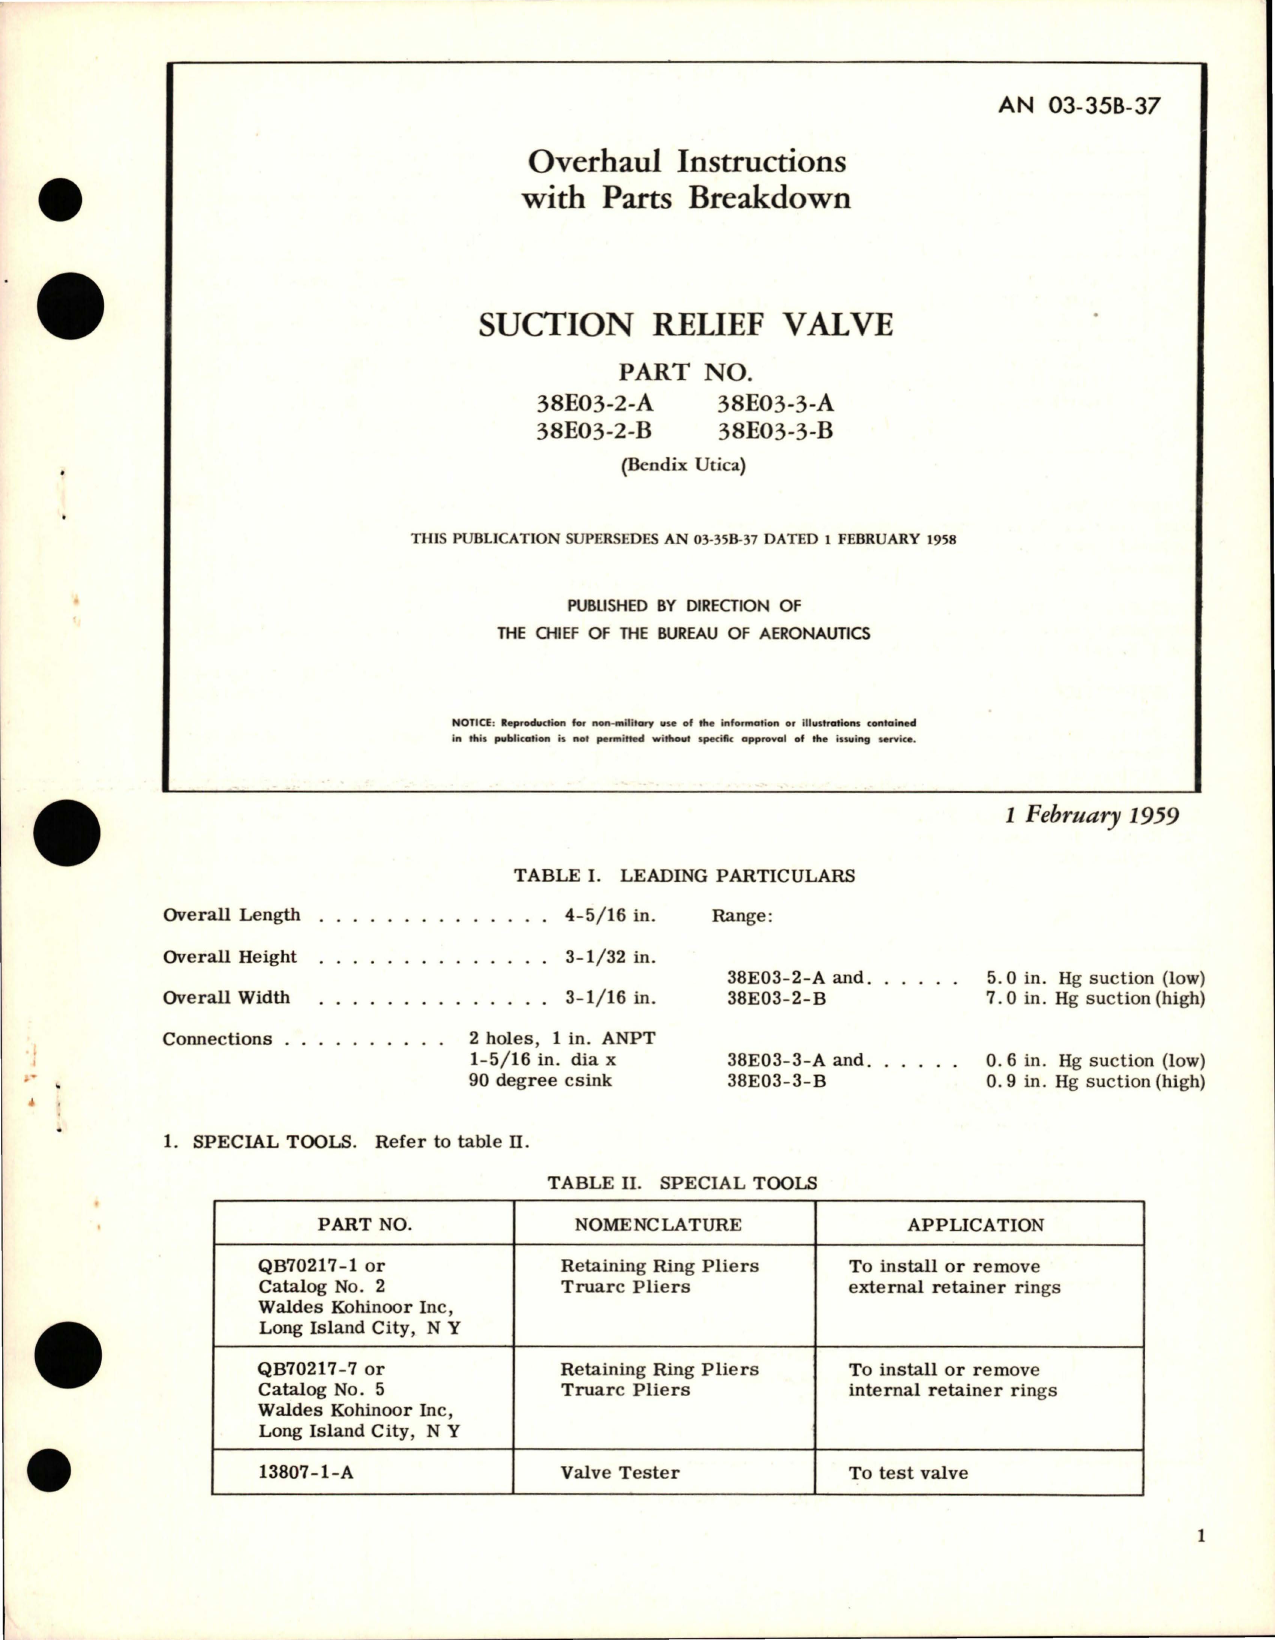 Sample page 1 from AirCorps Library document: Overhaul Instructions with Parts Breakdown for Suction Relief Valve - Parts 38E03-2-A, 38E03-2-B, 38E03-3-A, and 38E03-3-B